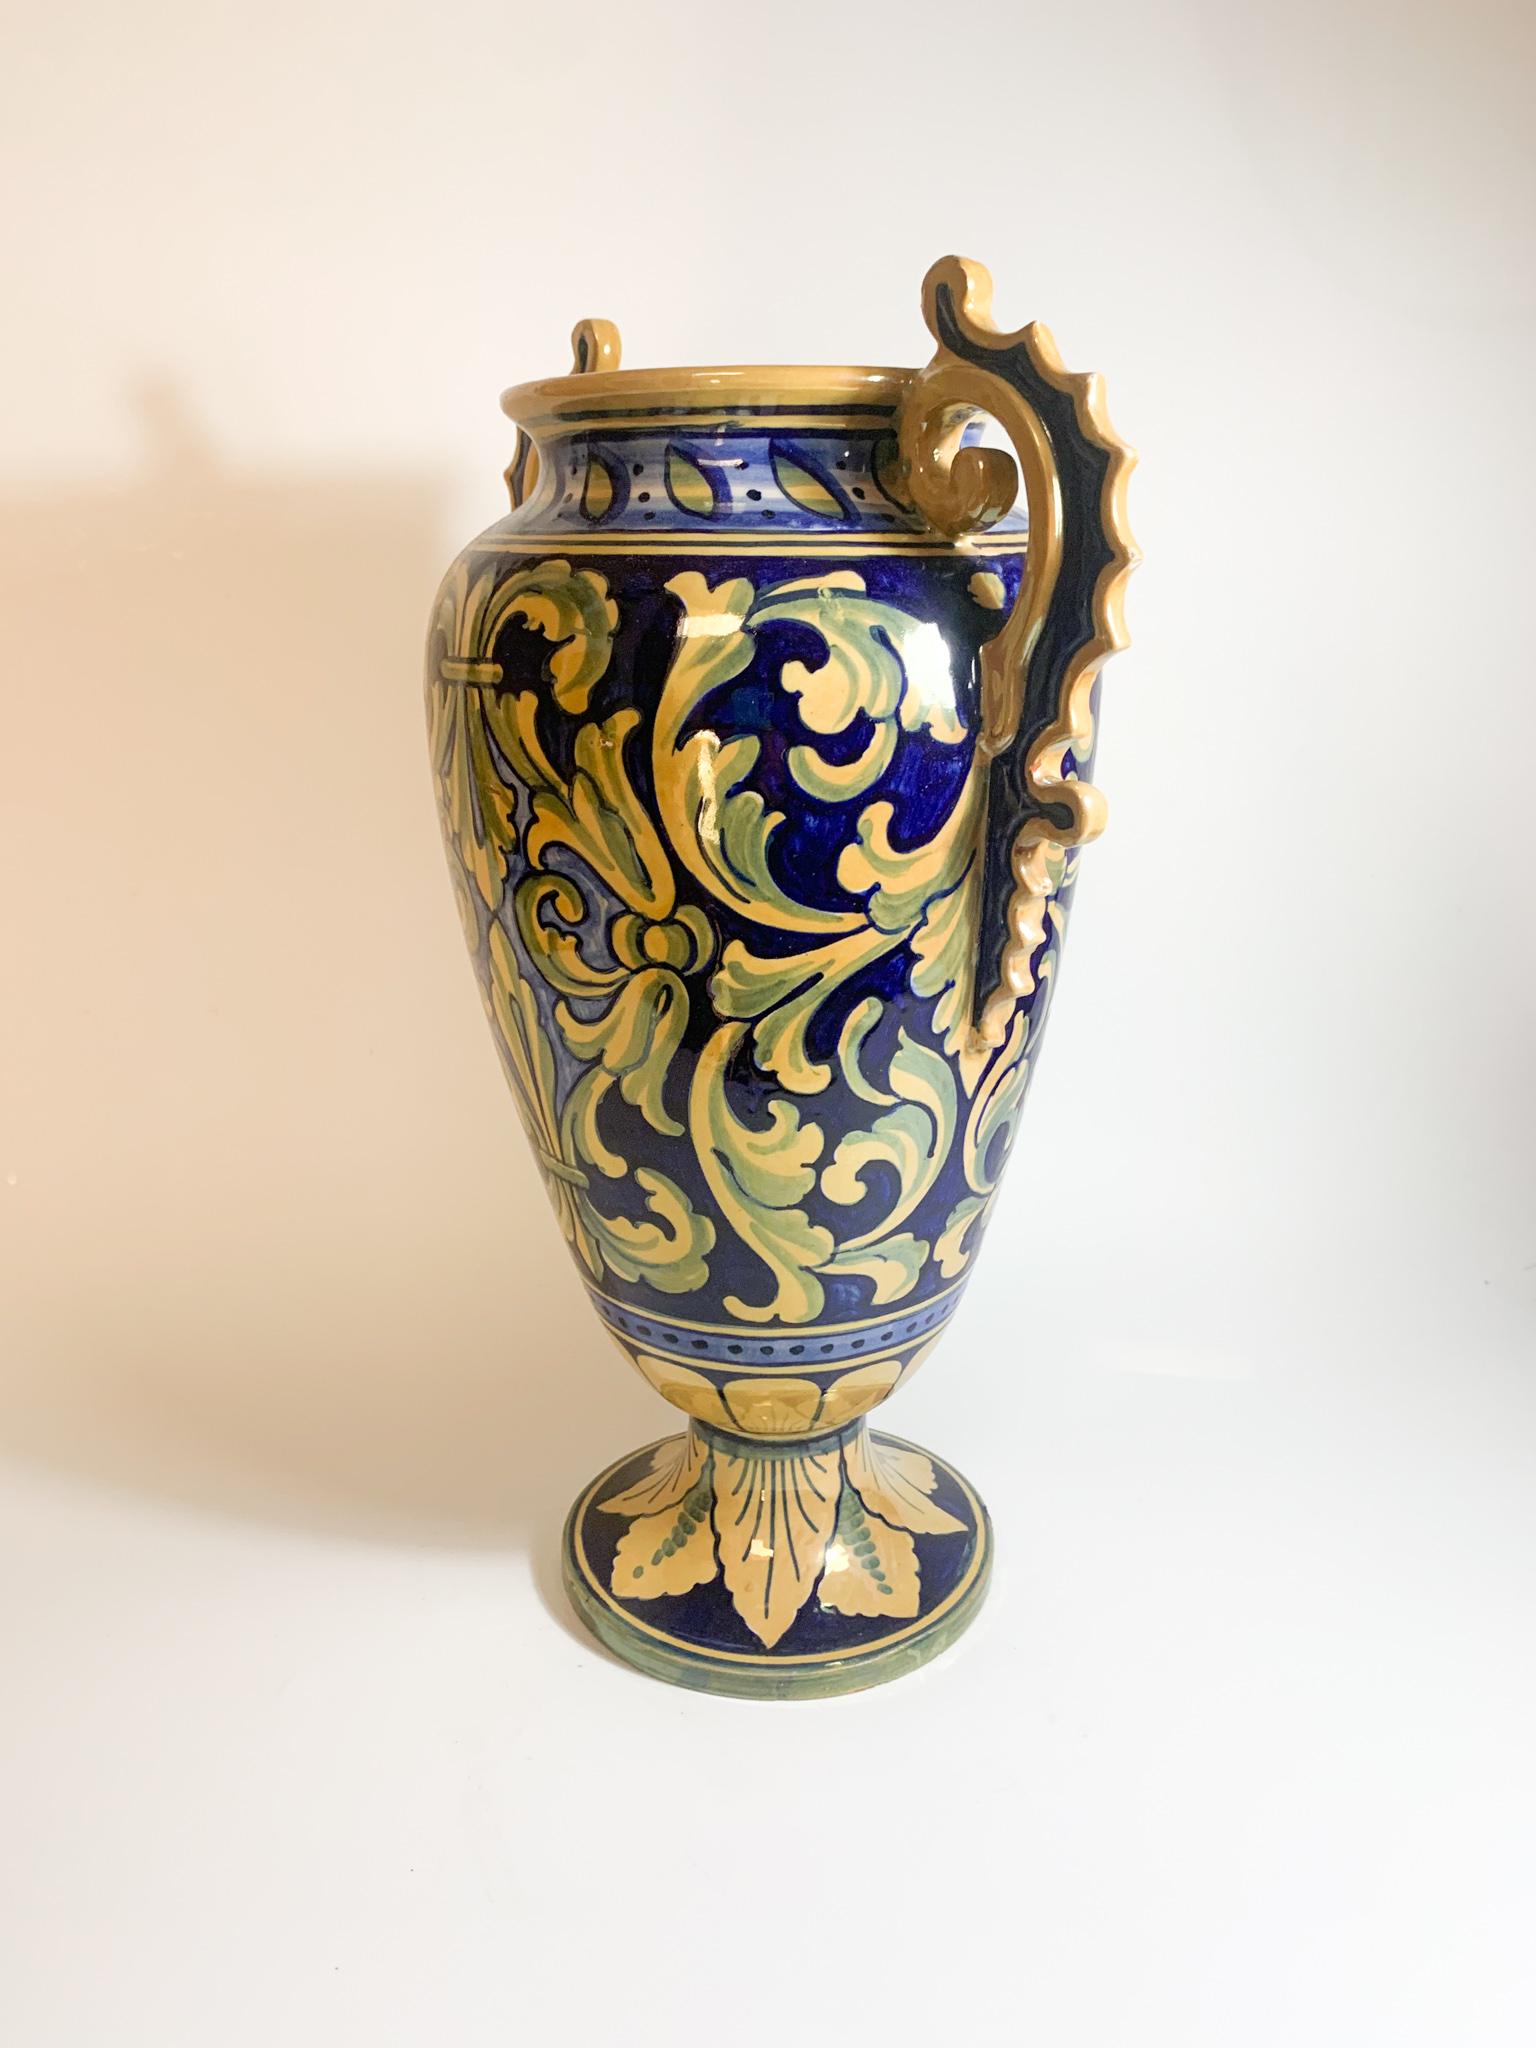 Italian Hand Painted Iridescent Ceramic Vase by Gualdo Tadino from the 1950s For Sale 5